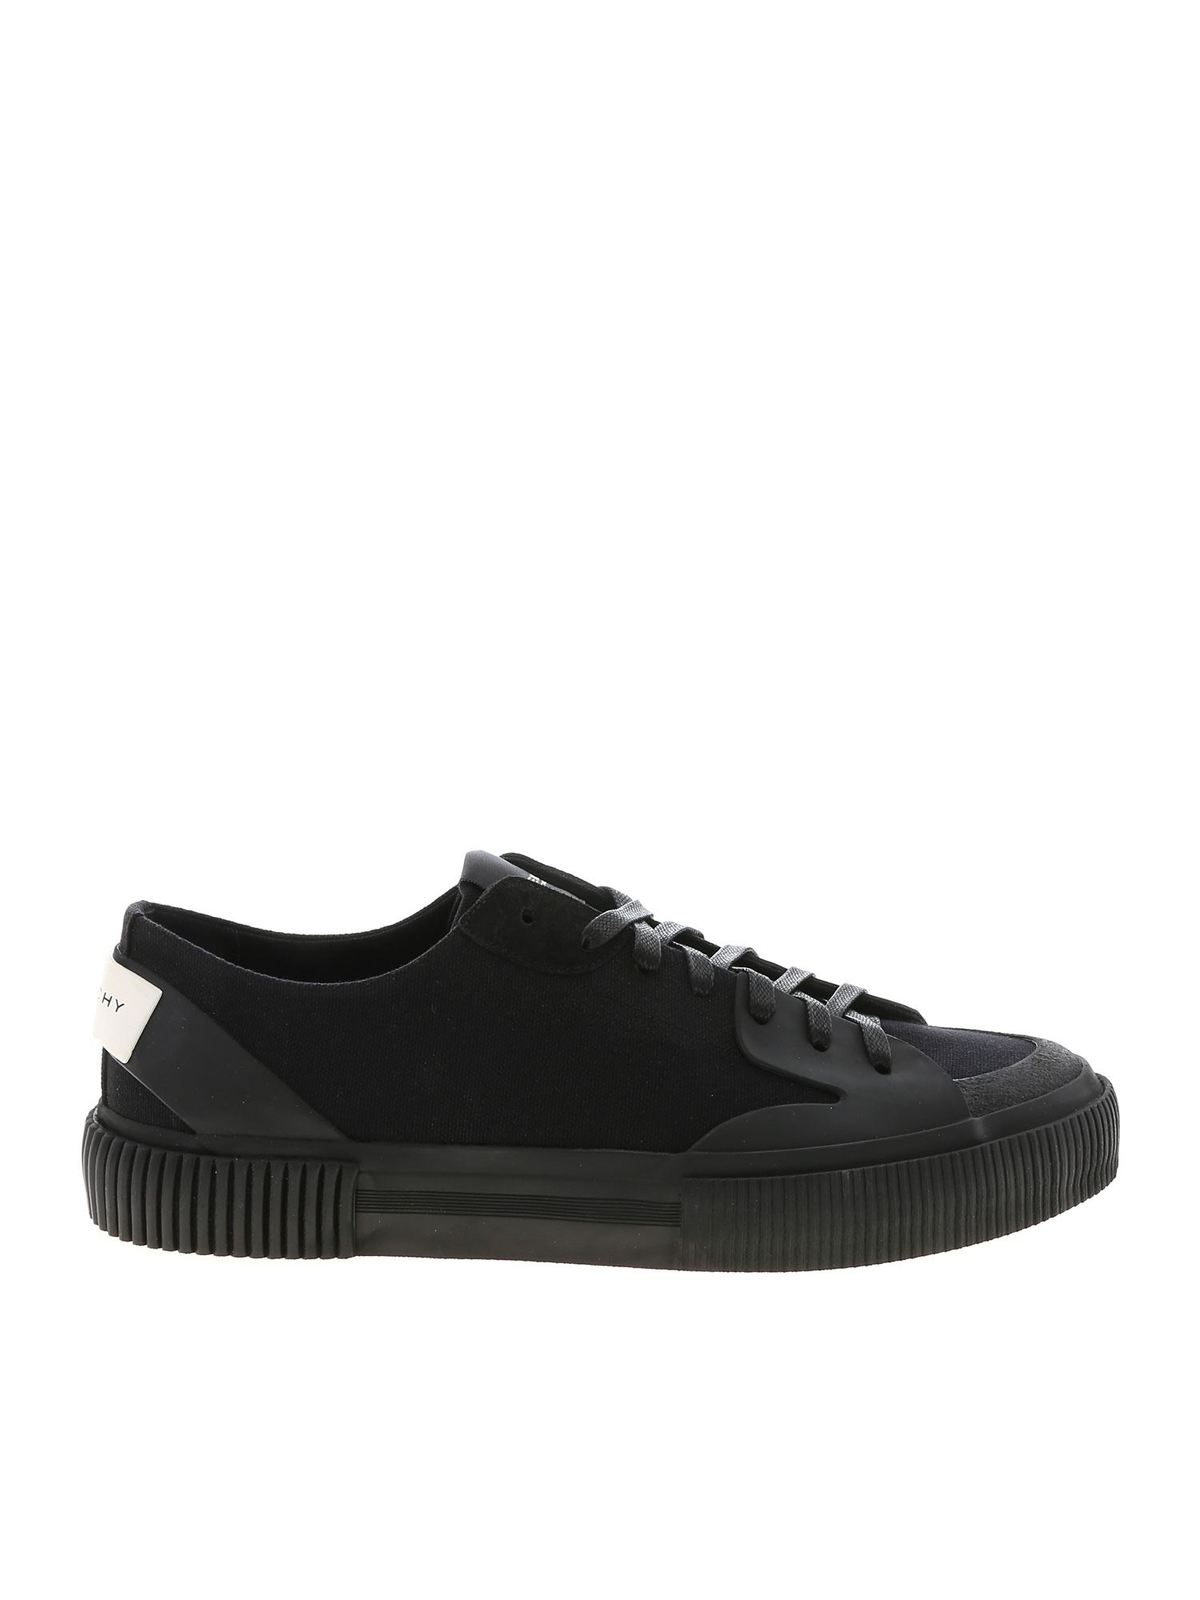 GIVENCHY TENNIS LIGHT SNEAKERS IN BLACK CANVAS